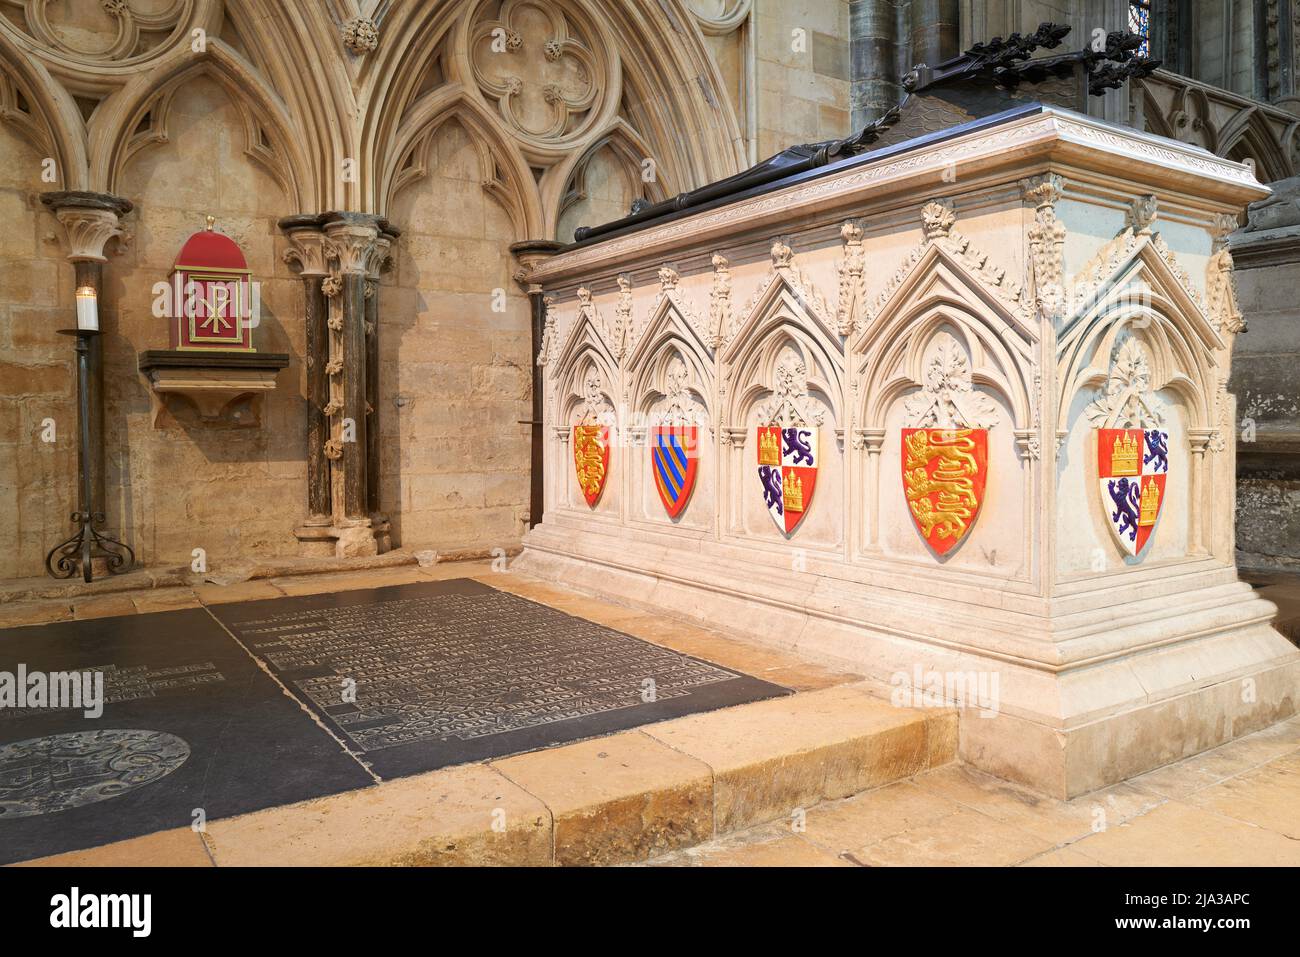 Eleanor of Castile's tomb in the christian medieval cathedral at Lincoln, England. Stock Photo